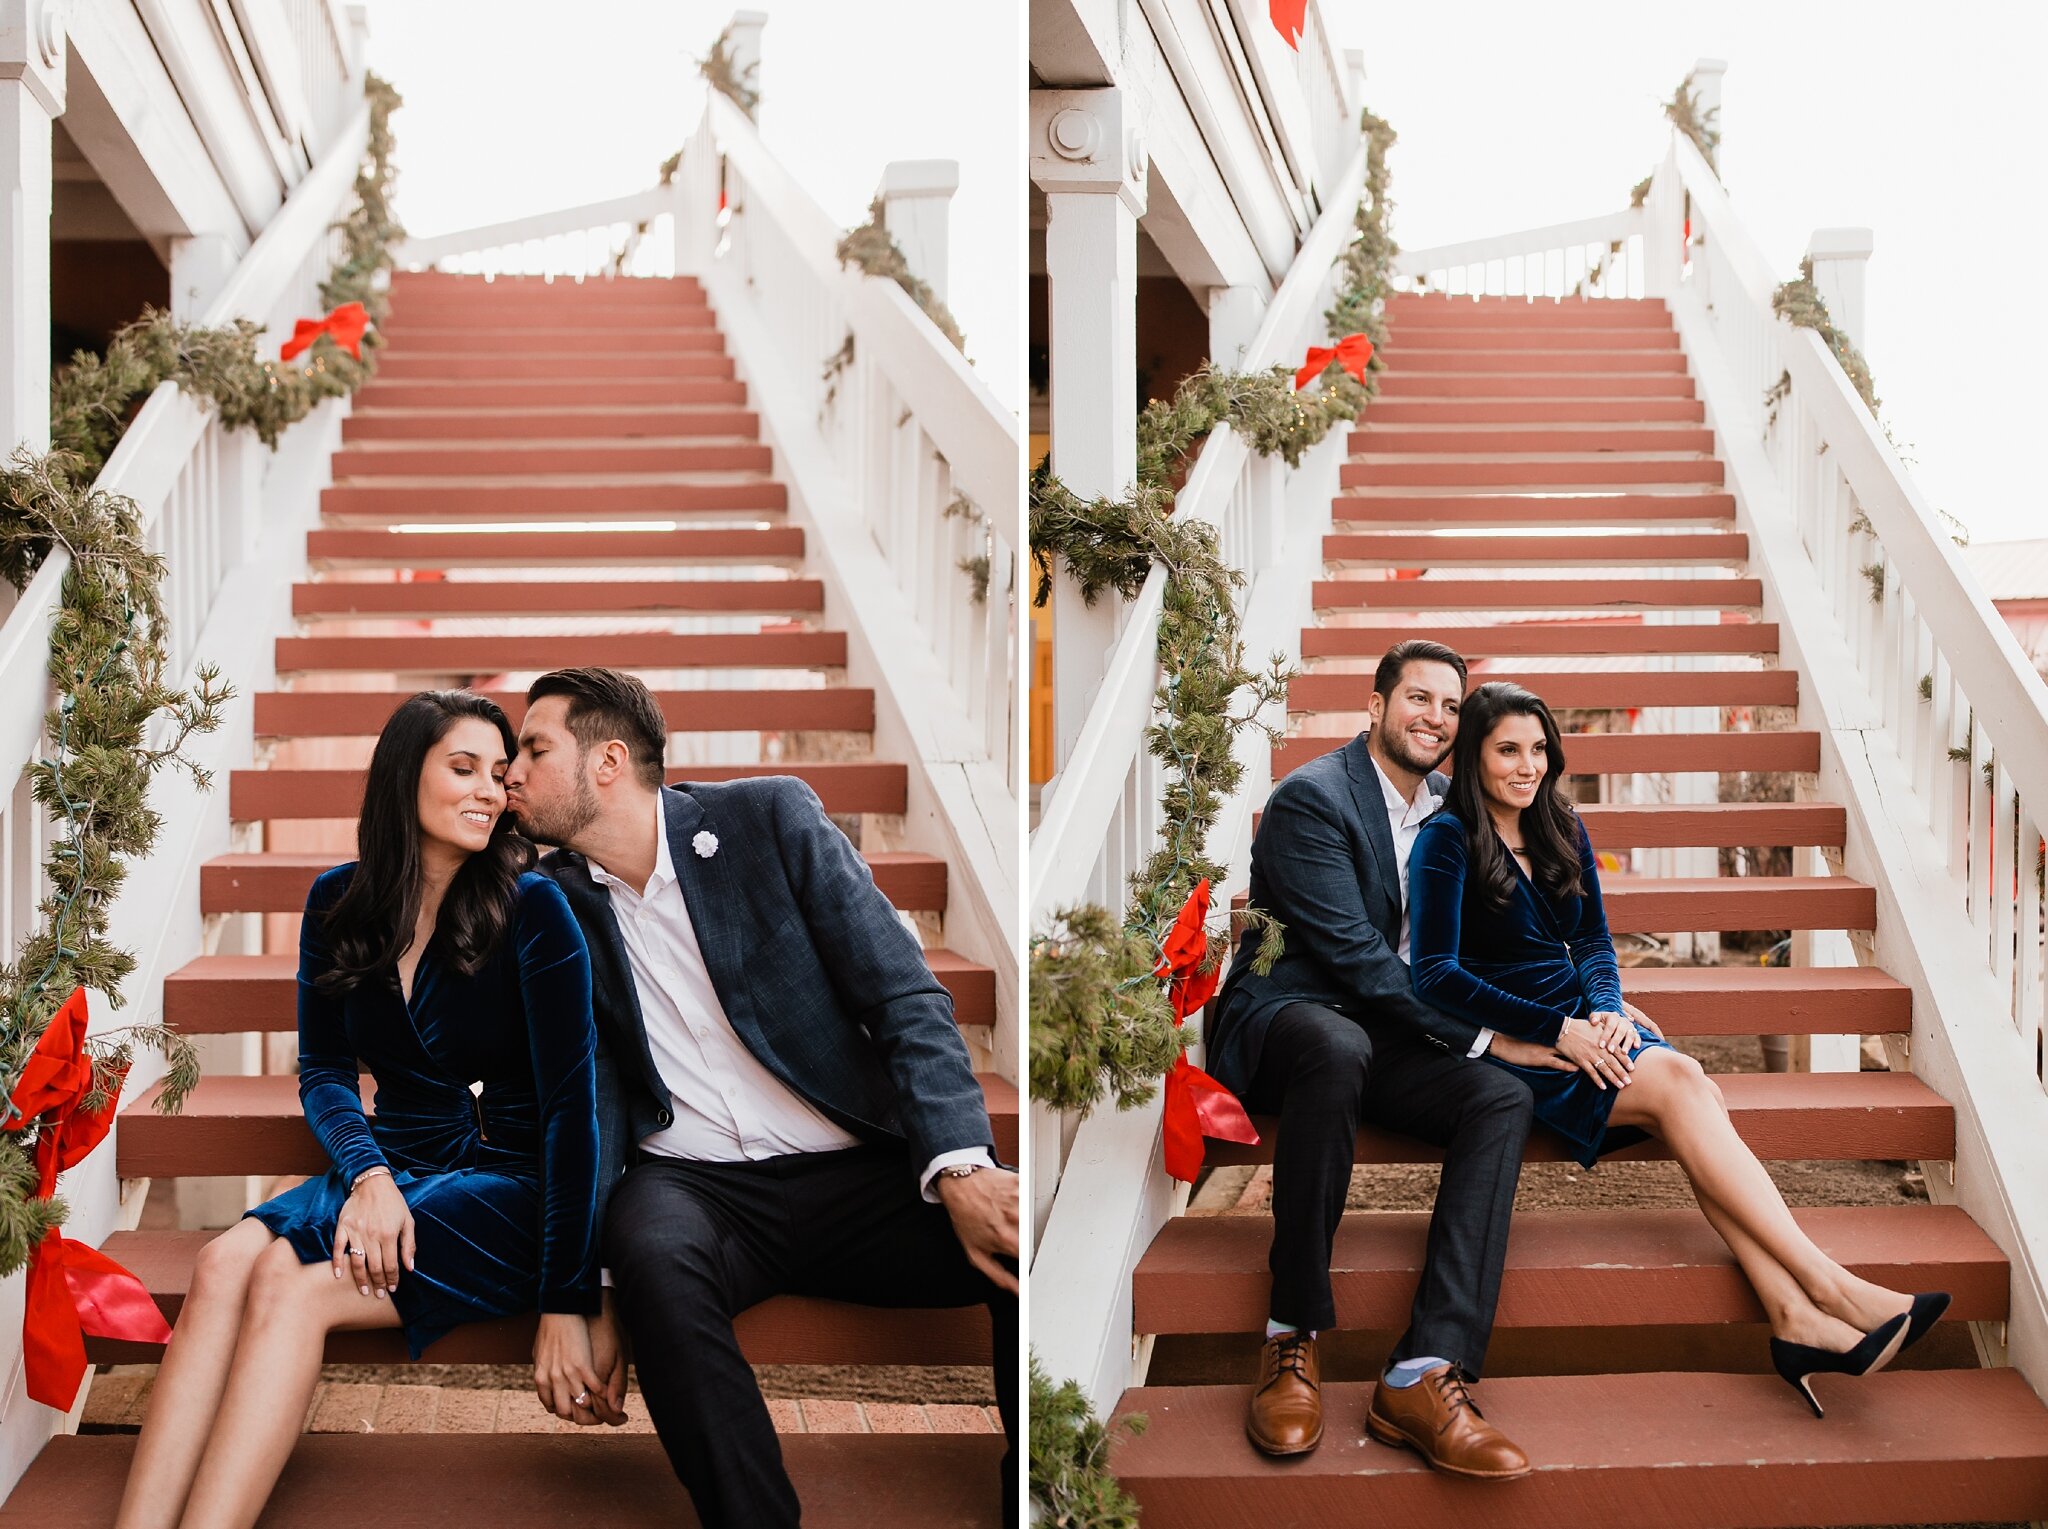 Alicia+lucia+photography+-+albuquerque+wedding+photographer+-+santa+fe+wedding+photography+-+new+mexico+wedding+photographer+-+new+mexico+wedding+-+albuquerque+engagement+-+old+town+engagement+-+christmas+engagement+-+holiday+engagement_0016.jpg